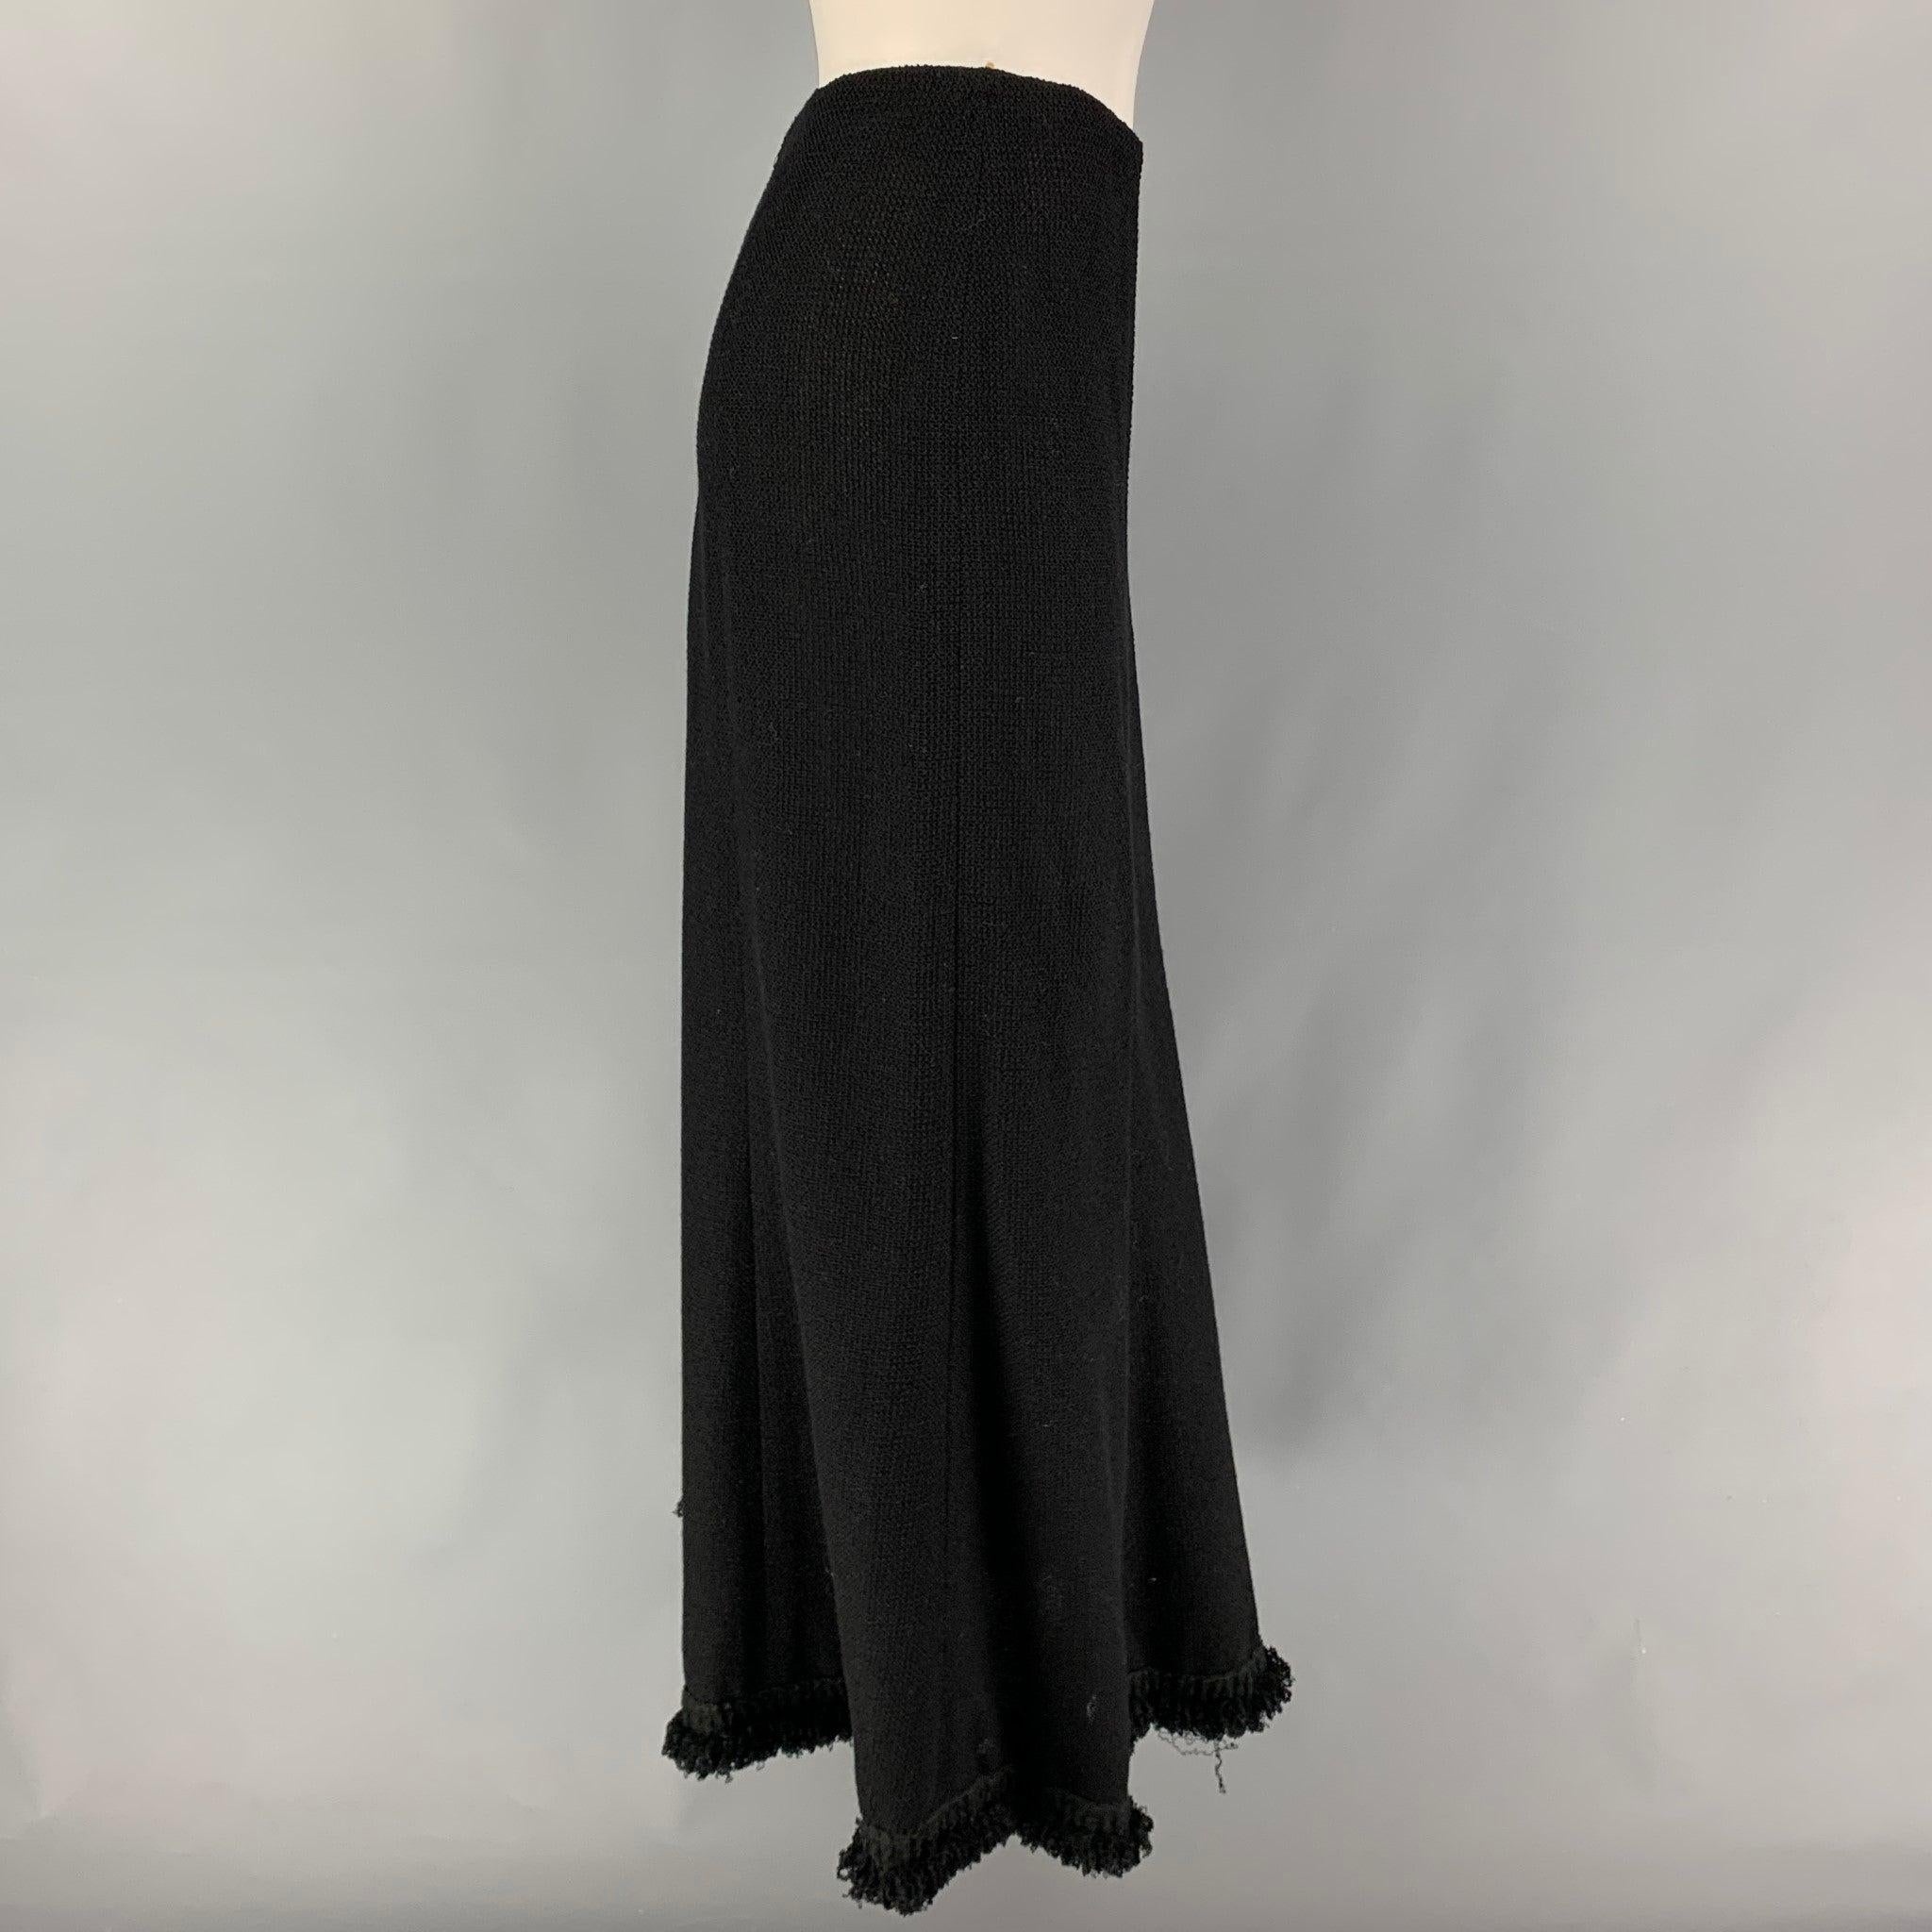 CHANEL 2003 skirt comes in a black textured wool blend featuring an a-line style, front small logo detail, ruffled hem, and a back zip up closure.
Very Good
Pre-Owned Condition. 

Marked:   03C / 94305 36 

Measurements: 
  Waist: 28 inches  Hip: 38